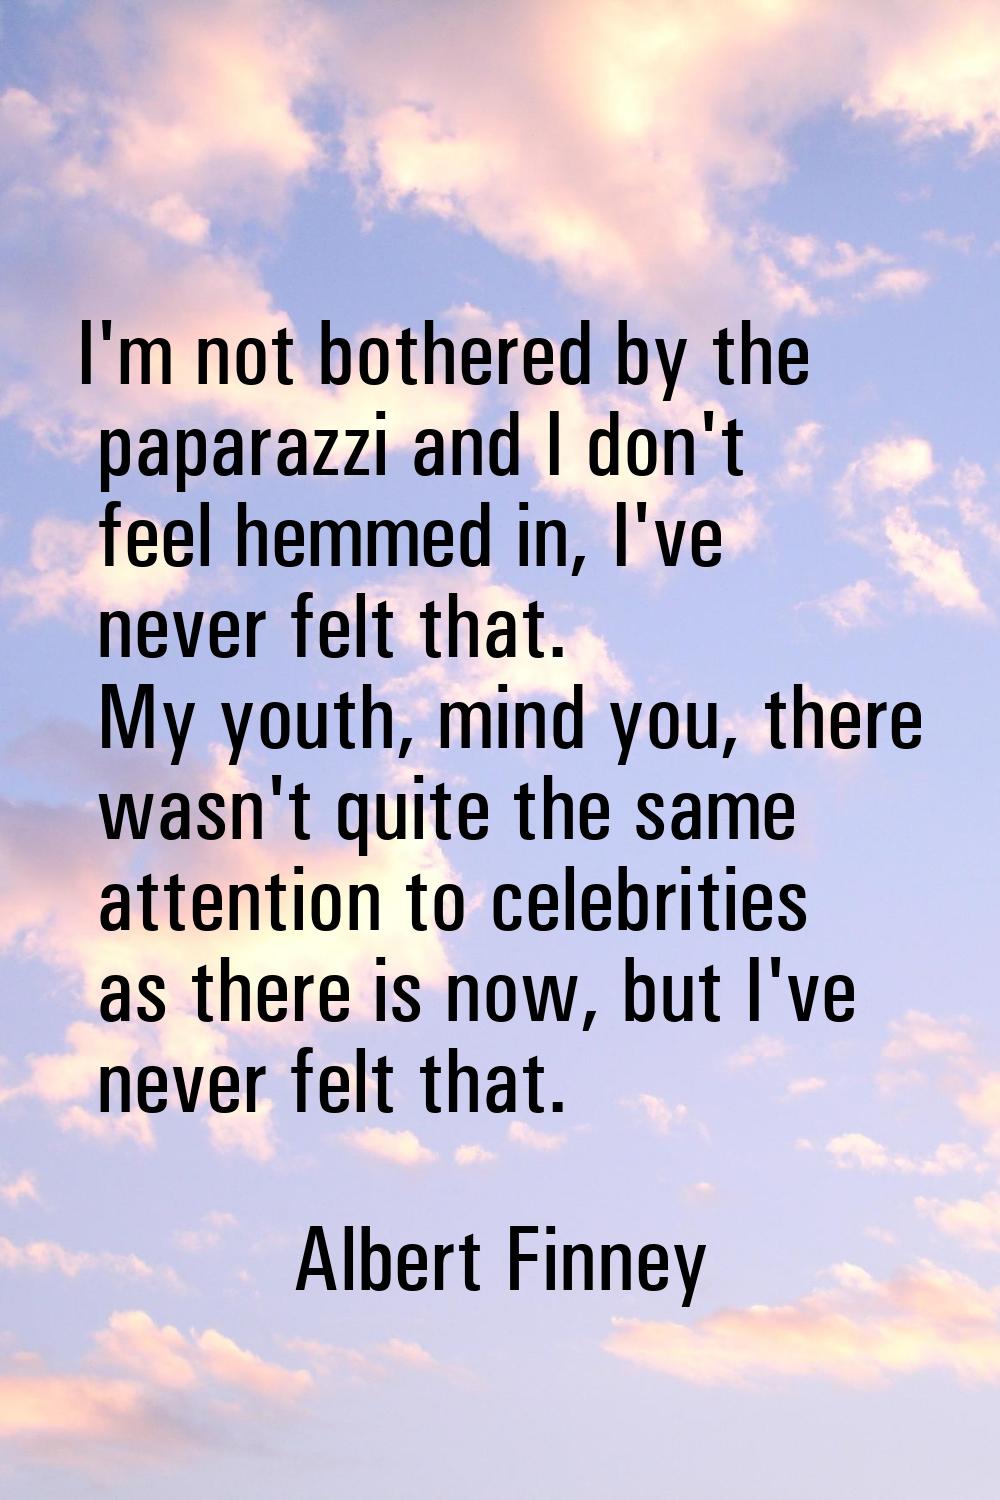 I'm not bothered by the paparazzi and I don't feel hemmed in, I've never felt that. My youth, mind 